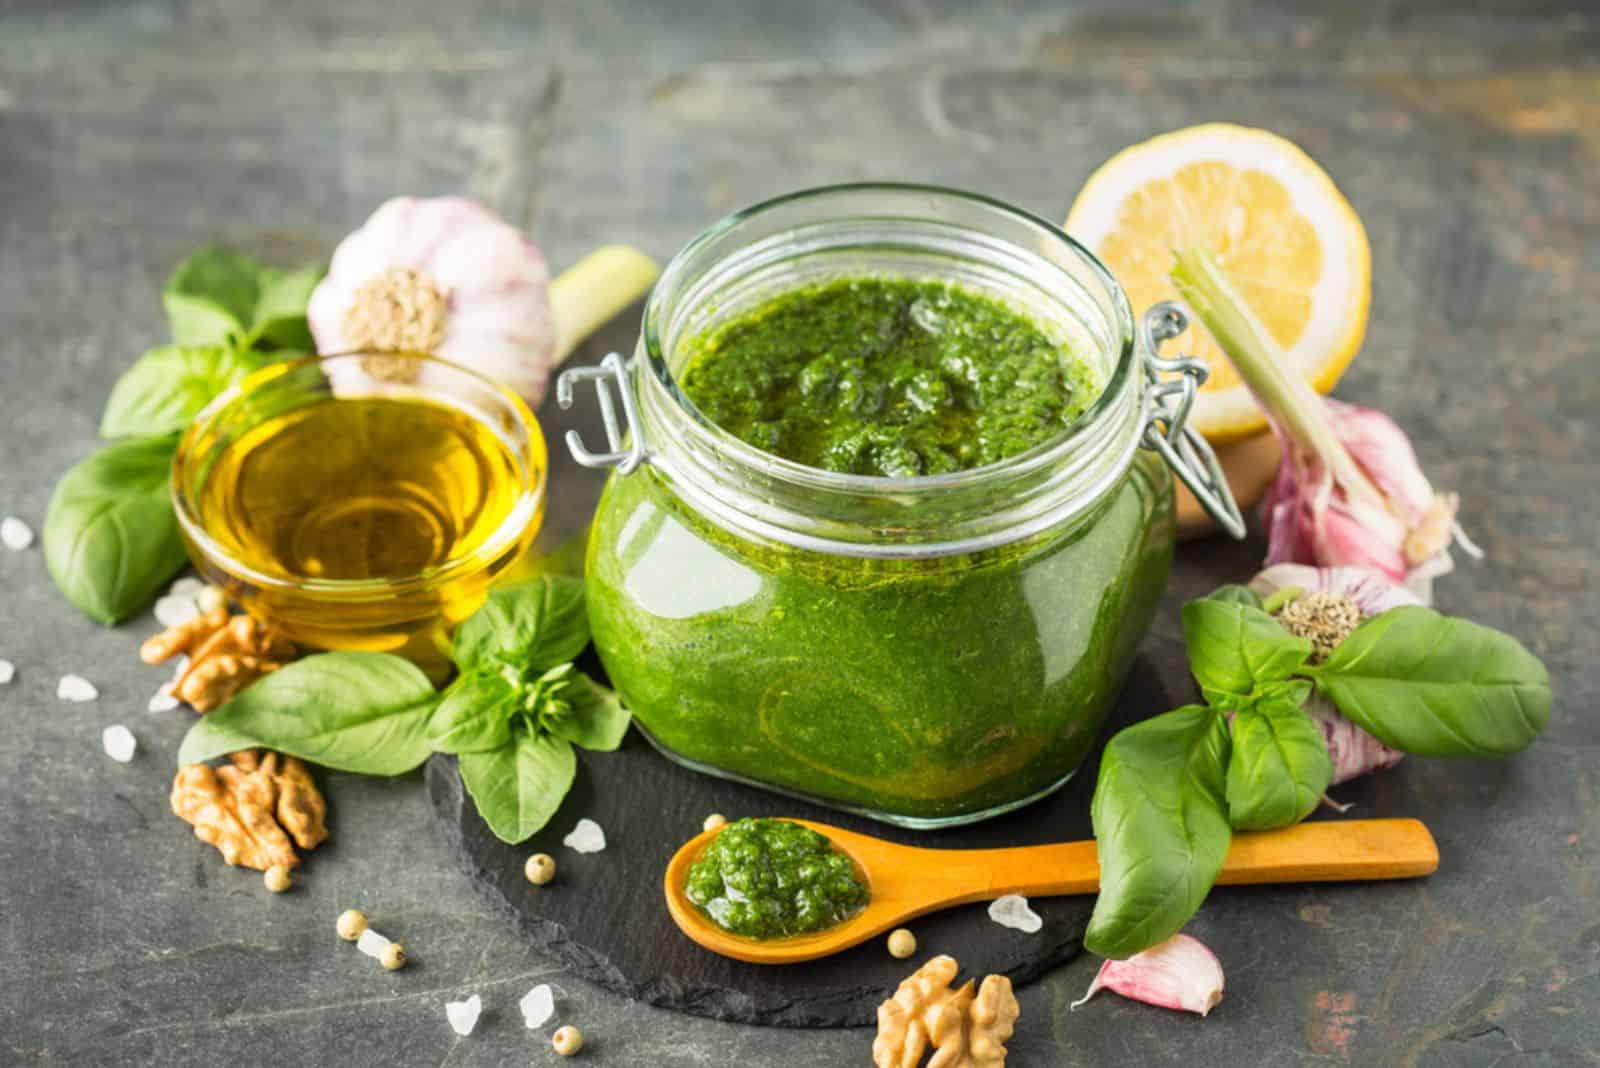 Fresh pesto sauce and ingredients in the glass jar